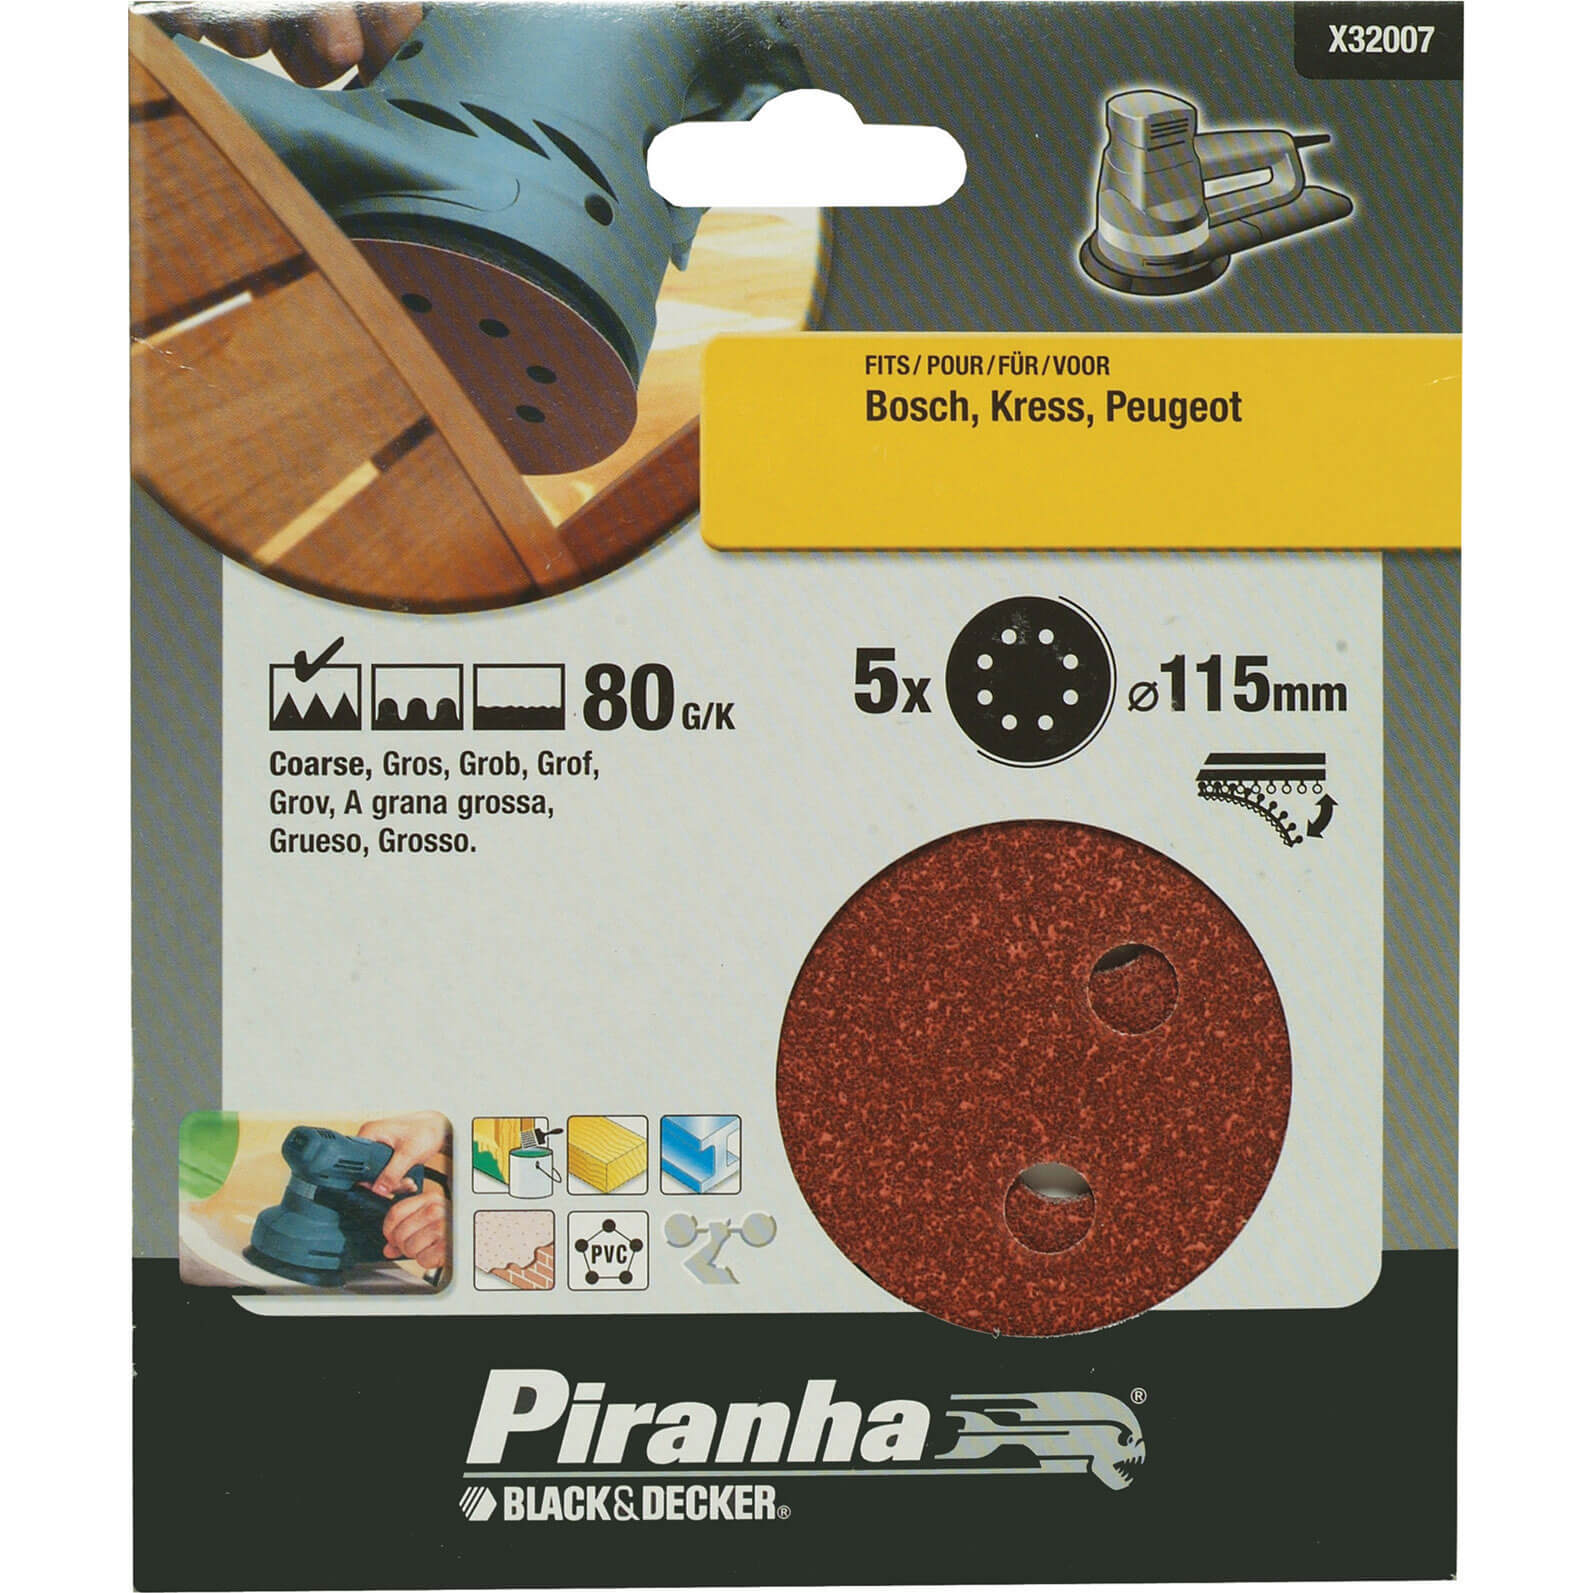 Image of Black and Decker Piranha Quick Fit ROS Sanding Discs 115mm 115mm 80g Pack of 5